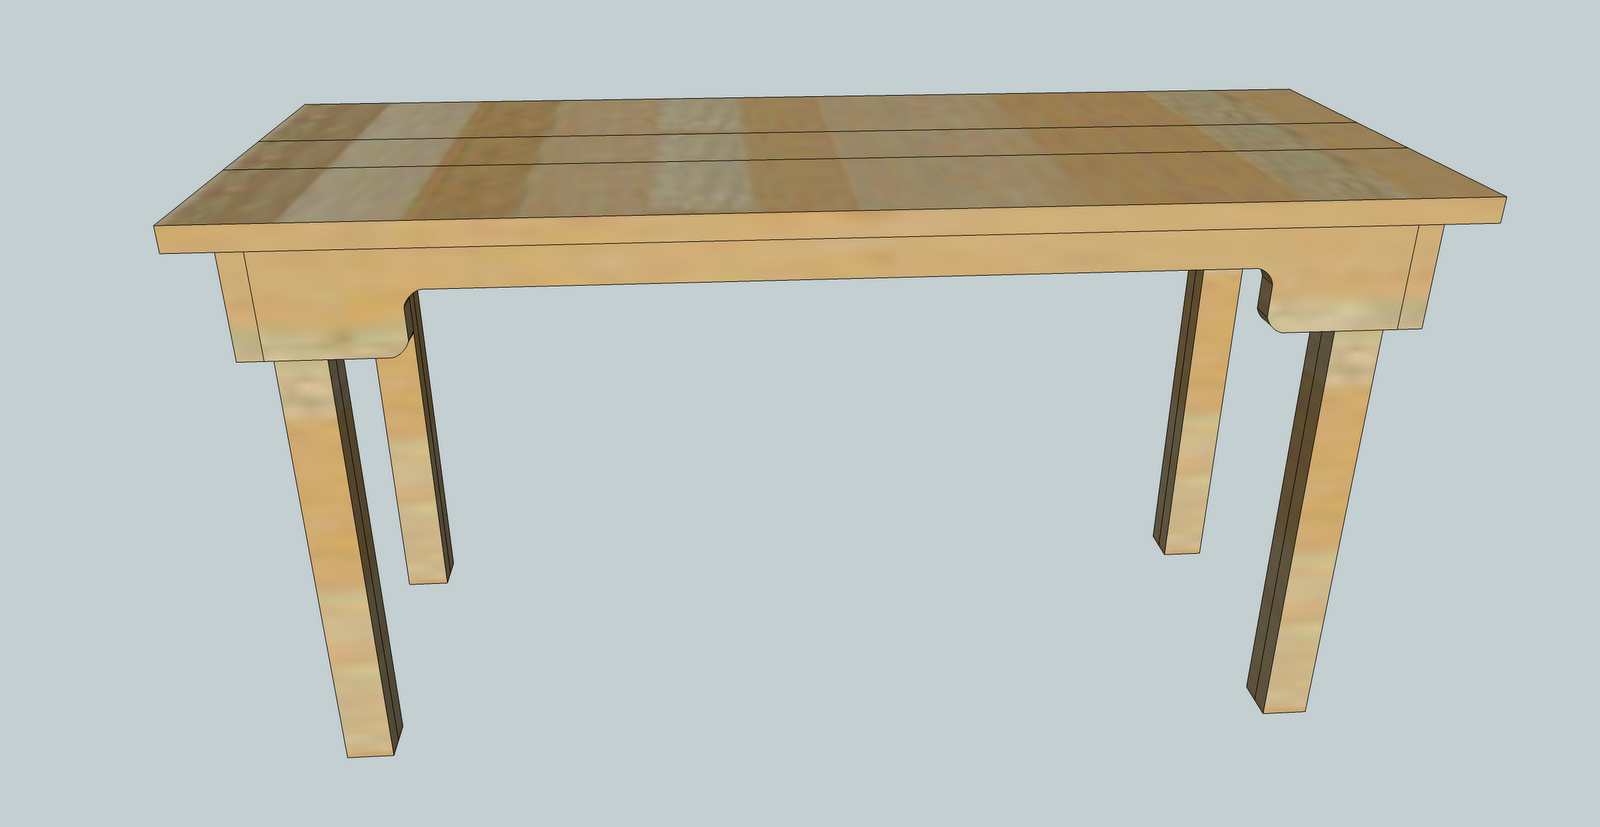 DIY Plans For Wooden Keyboard Stand Plans Free